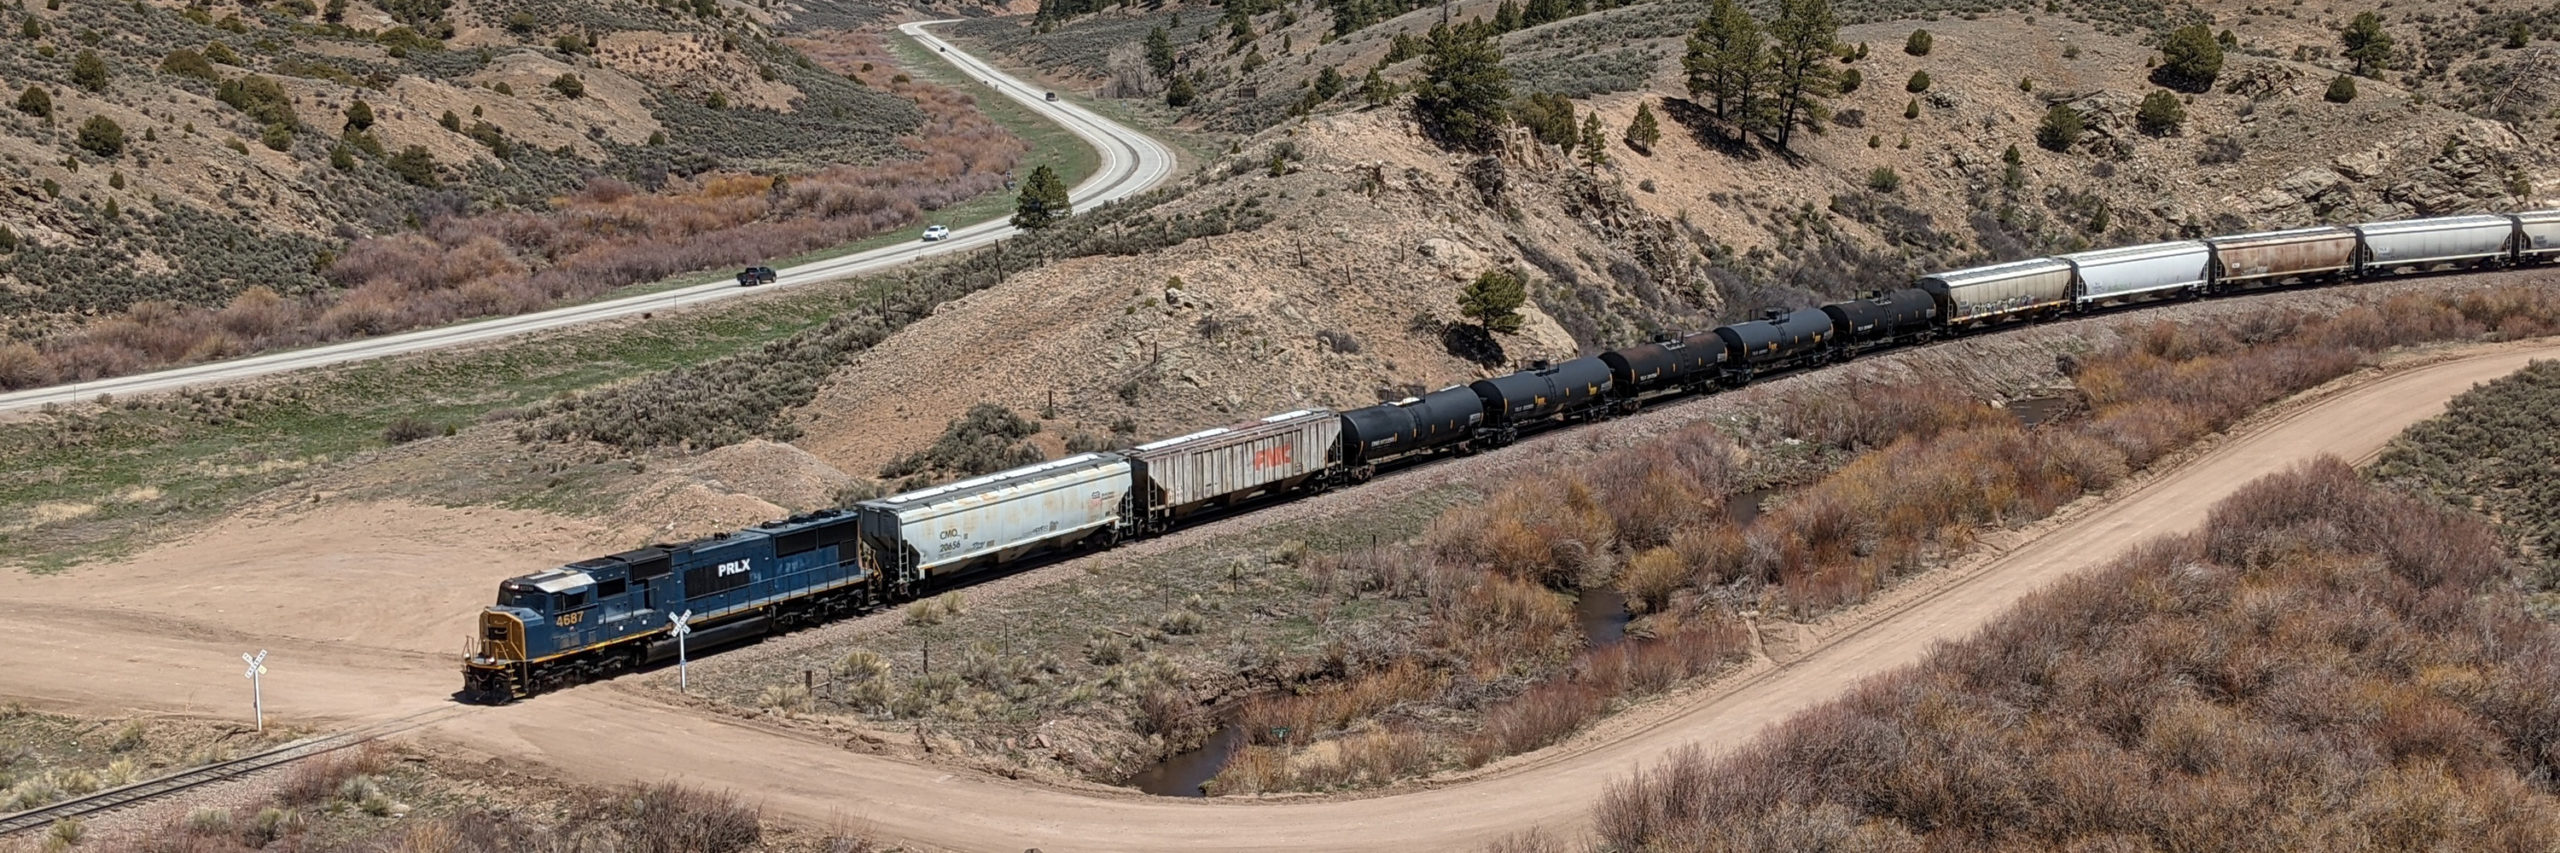 train with long line of freight cars travels on tracks over La Veta Pass